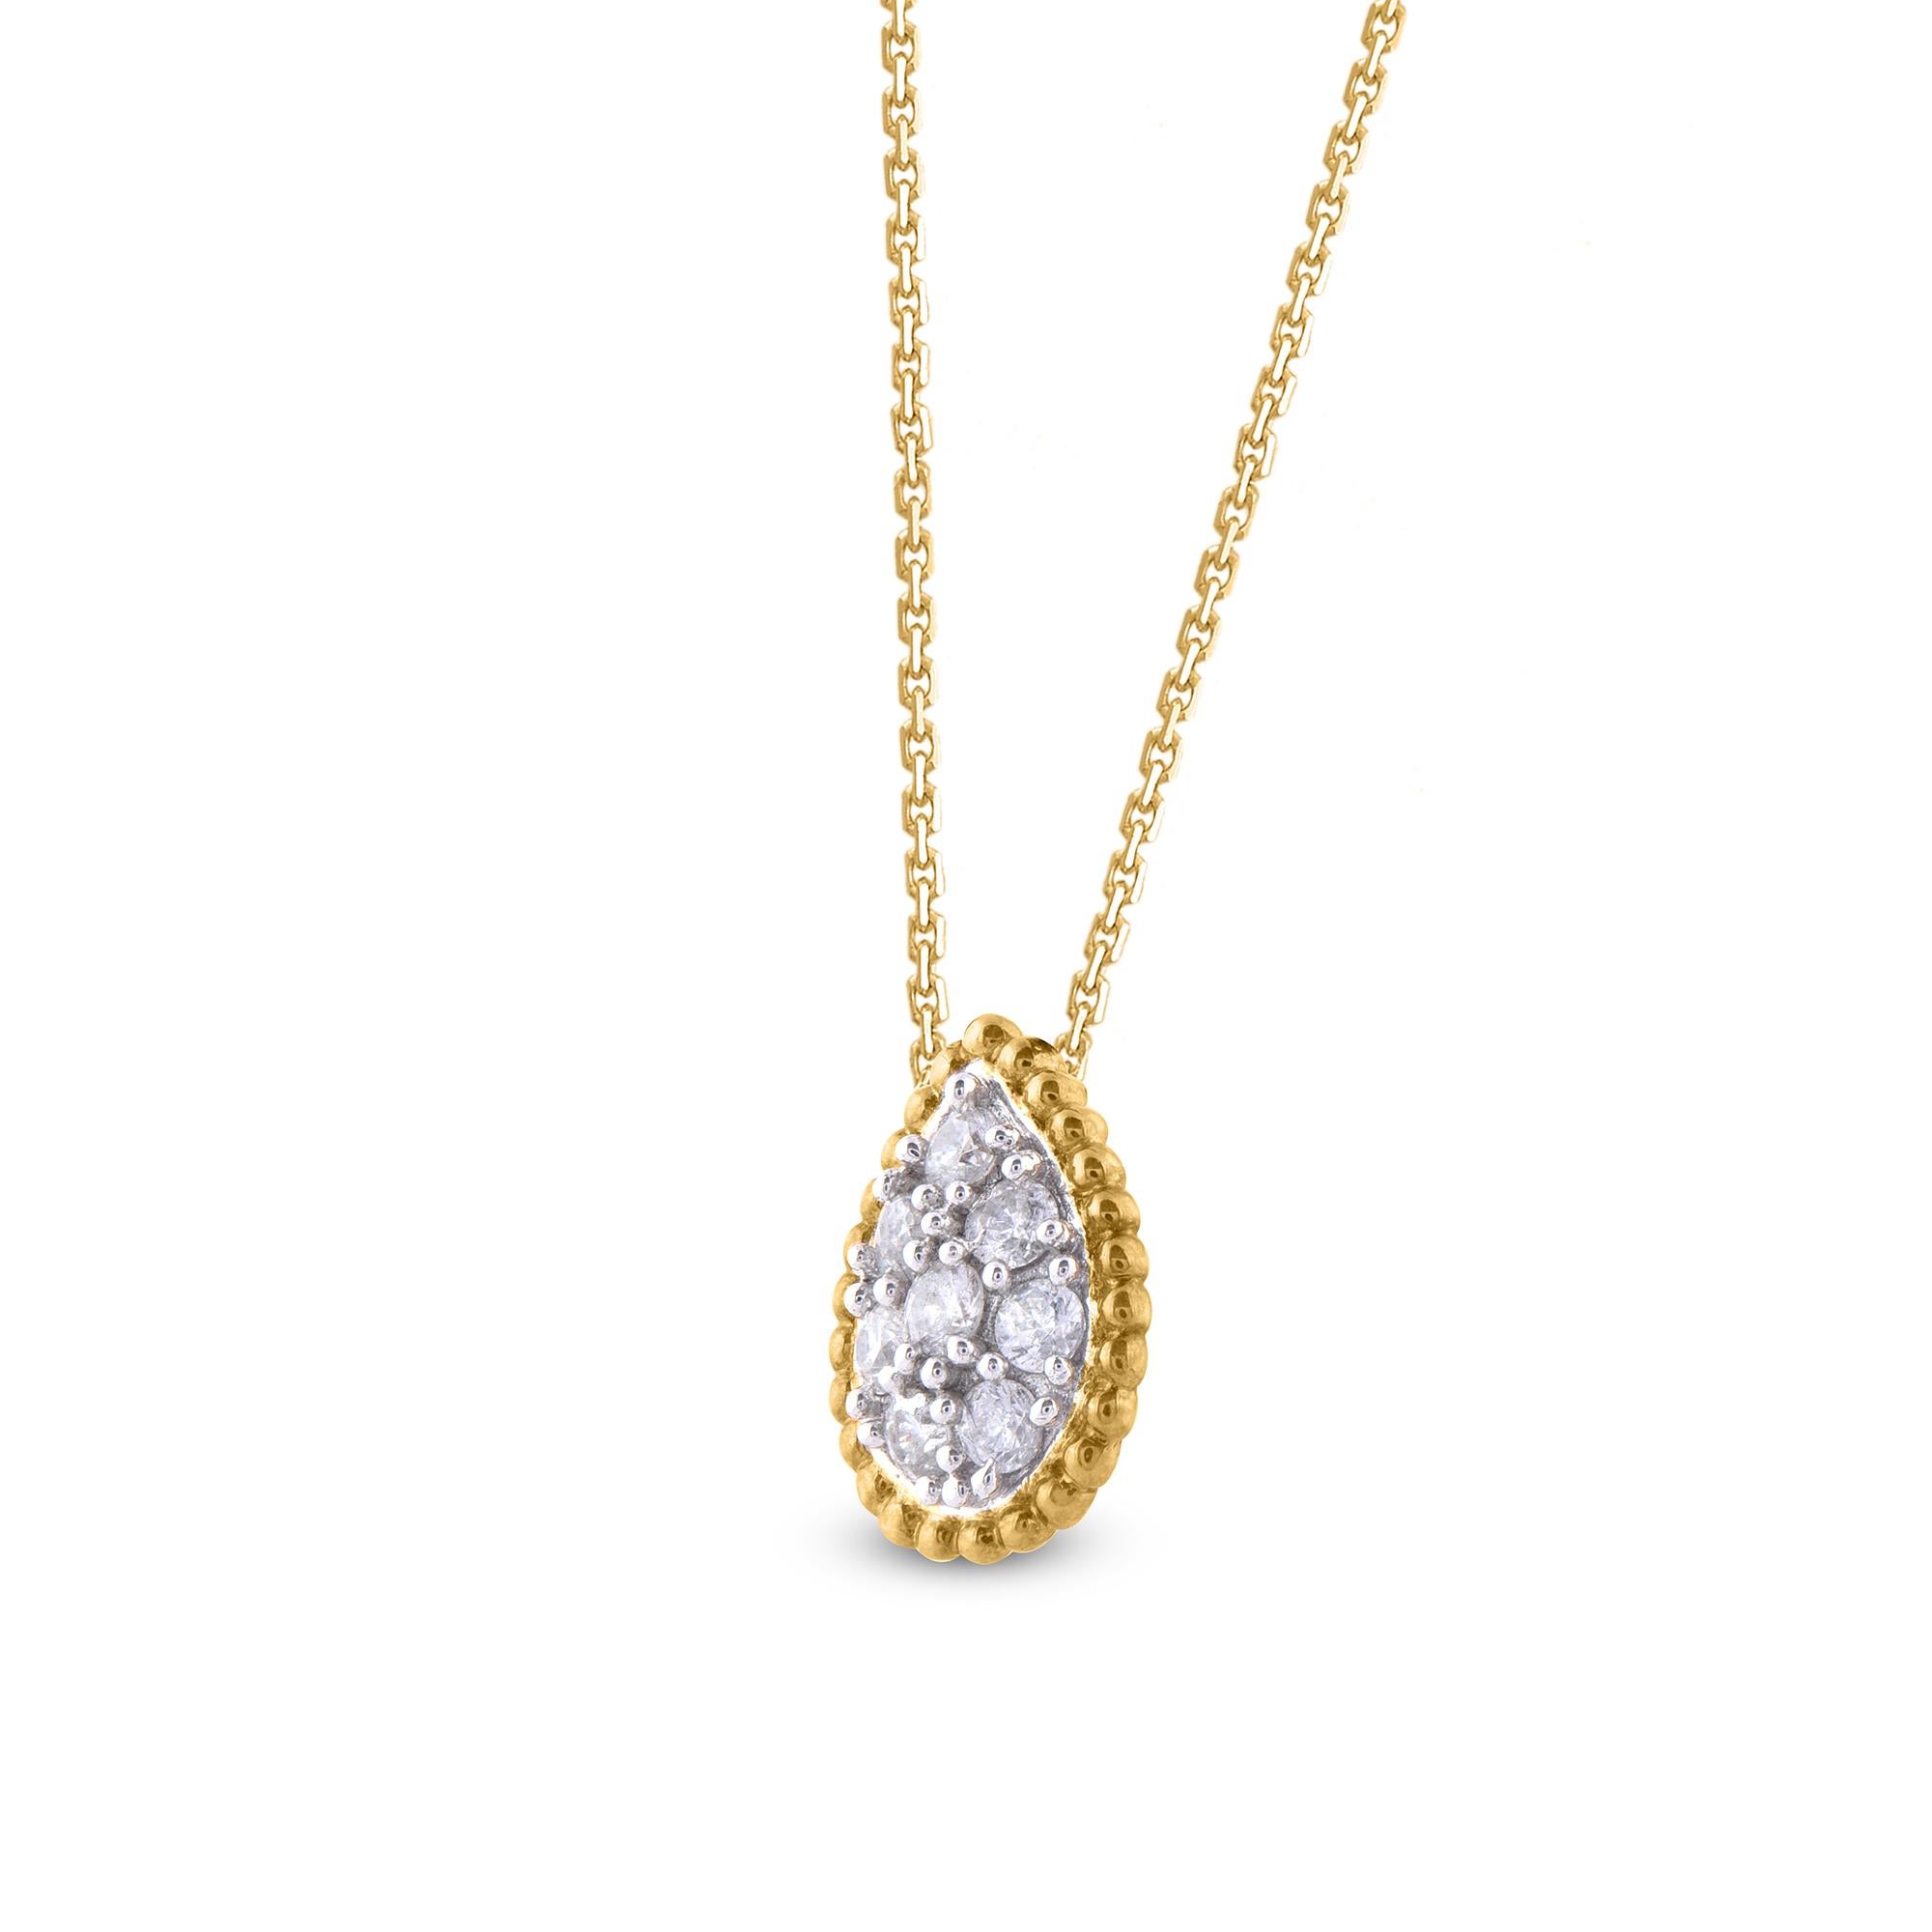 An easy and elegant addition to any attire, this sparkling white diamond pendant creates a style statement. Expertly crafted by our in-house experts in 14 KT yellow gold and accentuated with 8 round diamond set in prong setting. This pendant hangs